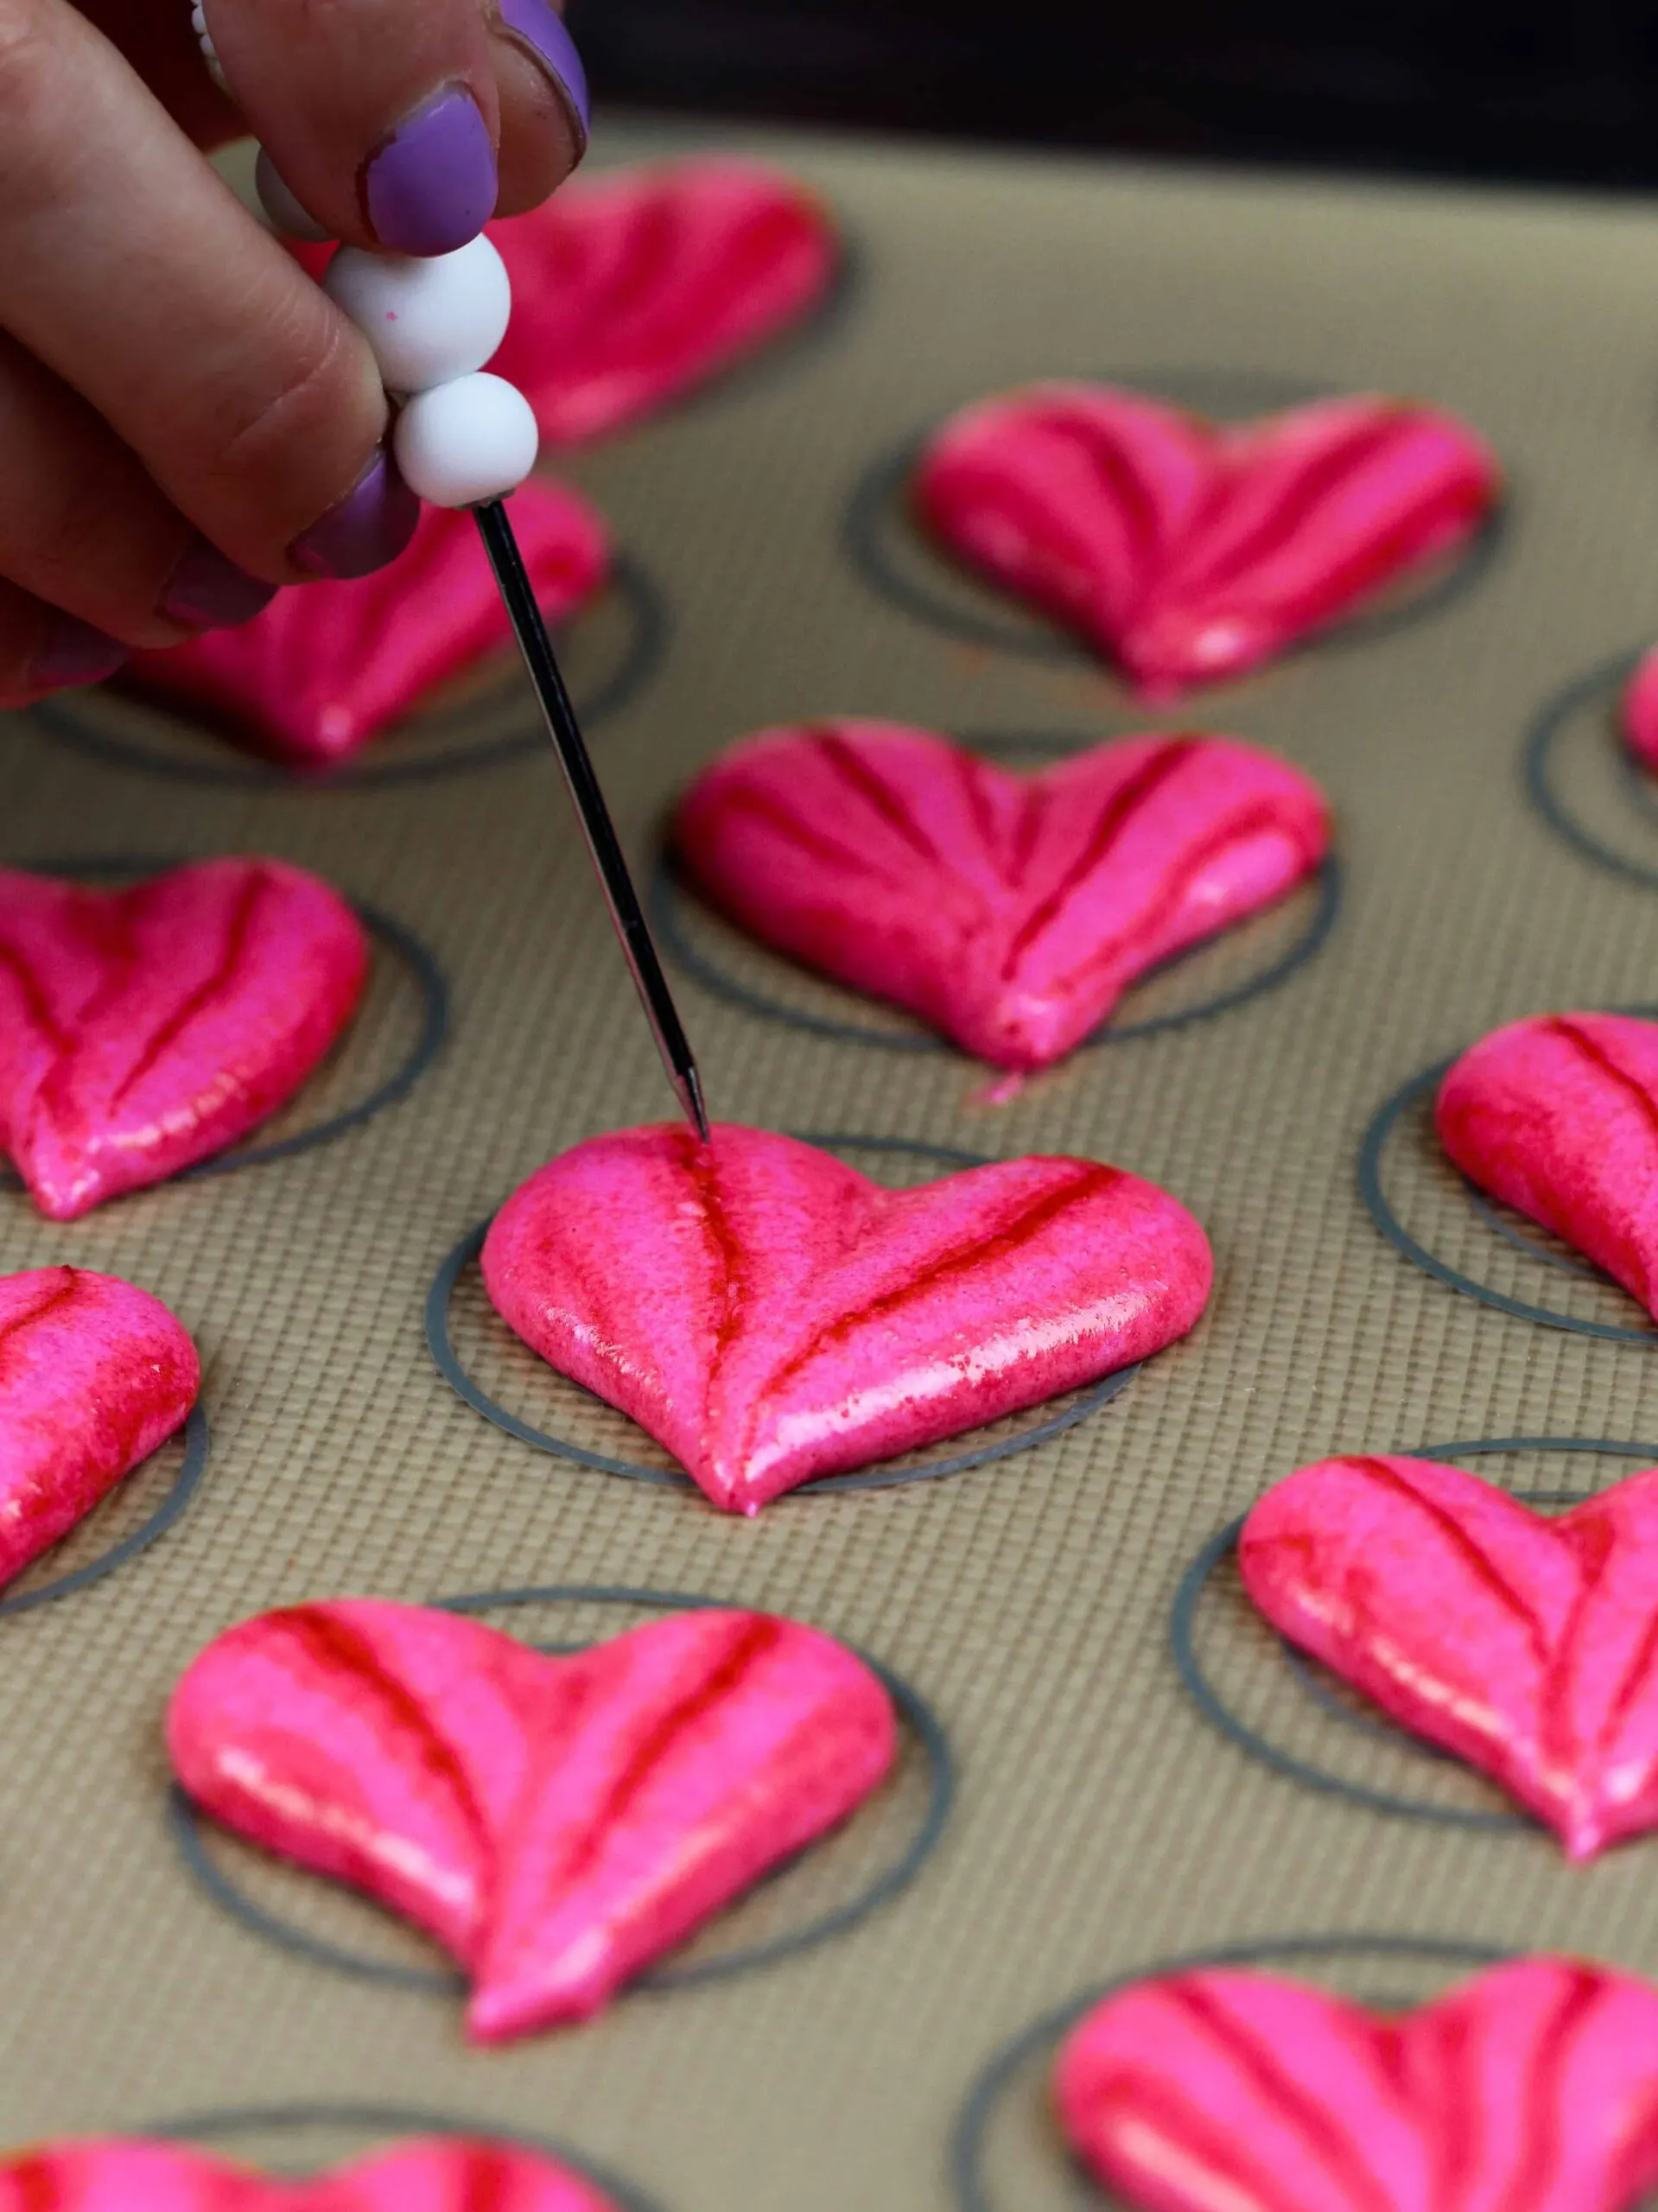 image of heart shaped macaron shells that have been piped and are resting